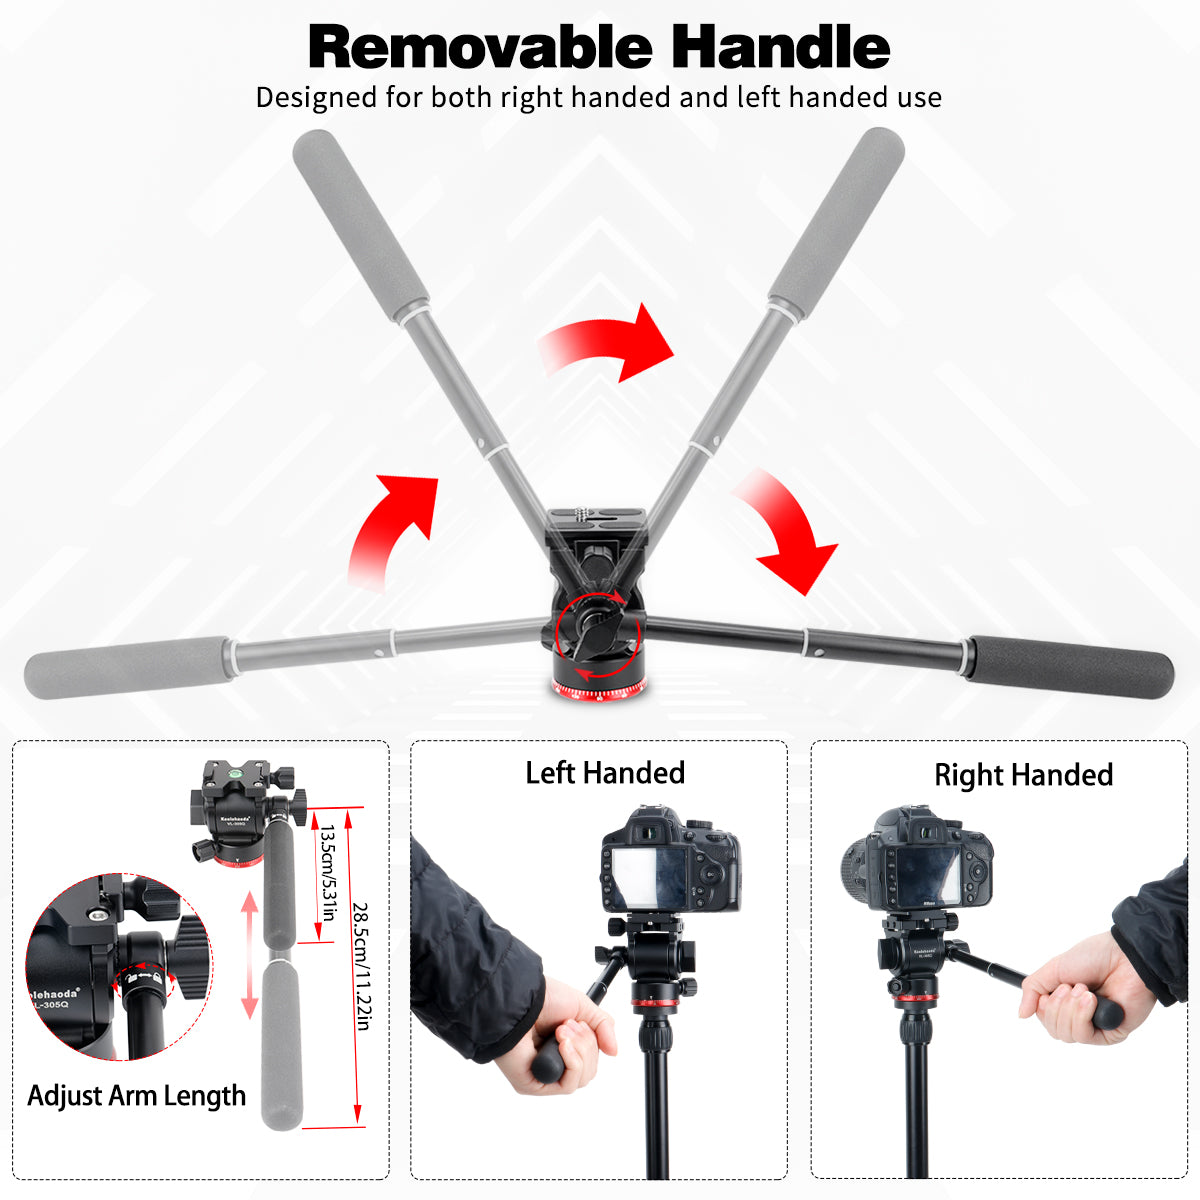 Koolehaoda Tripod Fluid Head Compact Video Head Pan Tilt Head with Arca-Type Plate for Compact Video Cameras, Mirrorless and DSLR Cameras,Load up to 6.6lbs - VL305Q